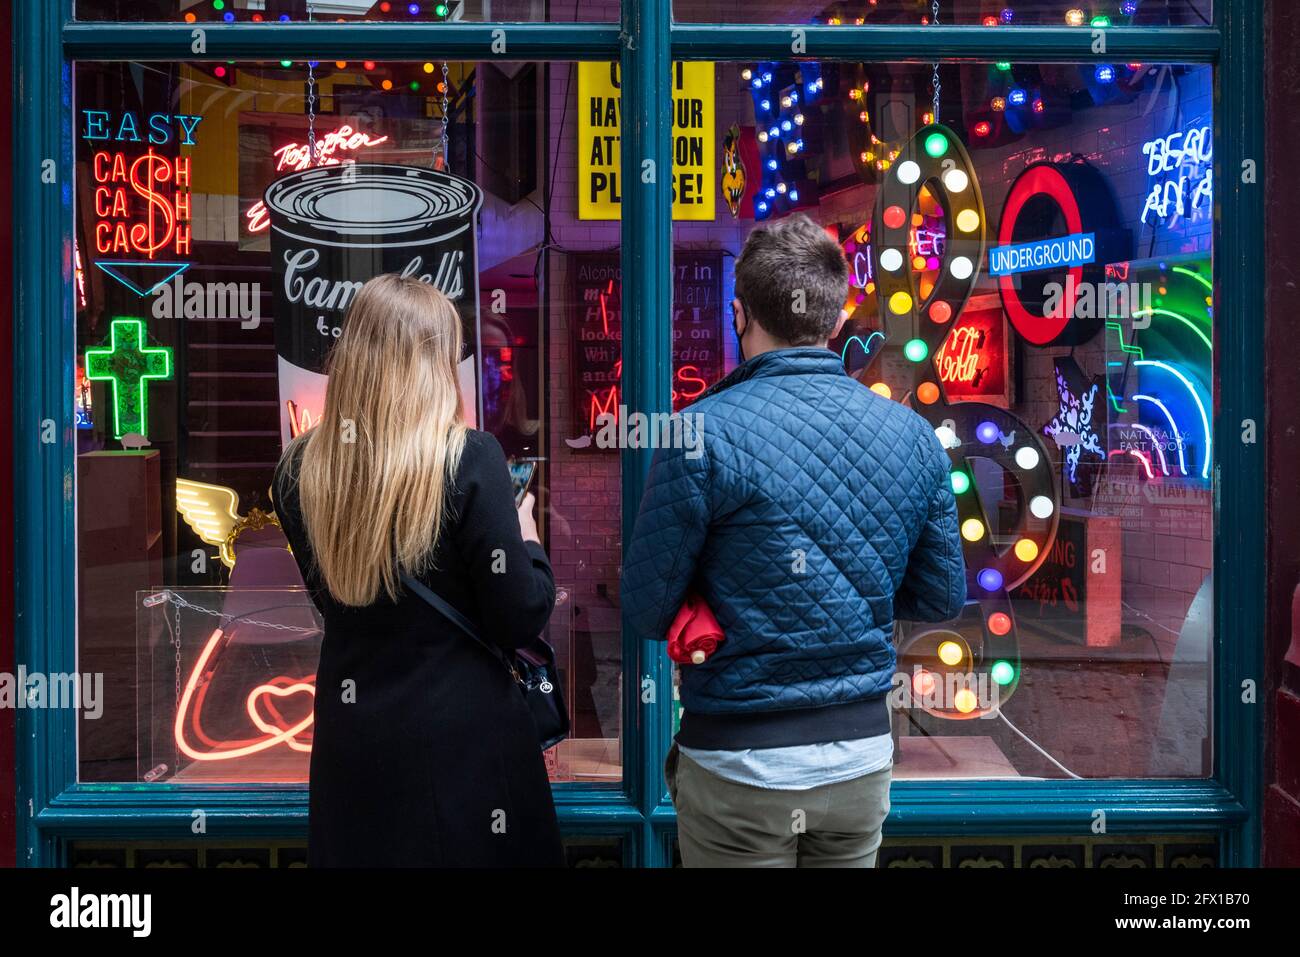 London, UK.  25 May 2021. Passers by view “Electric City” an exhibition in Leadenhall Market of neon and set pieces made for film by Gods Own Junkyard, which has worked on film sets for over 40 years. Founder, Chris Bracey passed away in 2014 and the business has since been run by his wife Linda and sons Matthew and Marcus, all neon makers and designers. On show 26th May to 31st July is neon signage from Stanley Kubrick’s Eyes Wide Shut, Judge Dredd, Batman, Tomb Raider, Charlie and the Chocolate Factory and The Dark Knight.  Credit: Stephen Chung / Alamy Live News Stock Photo